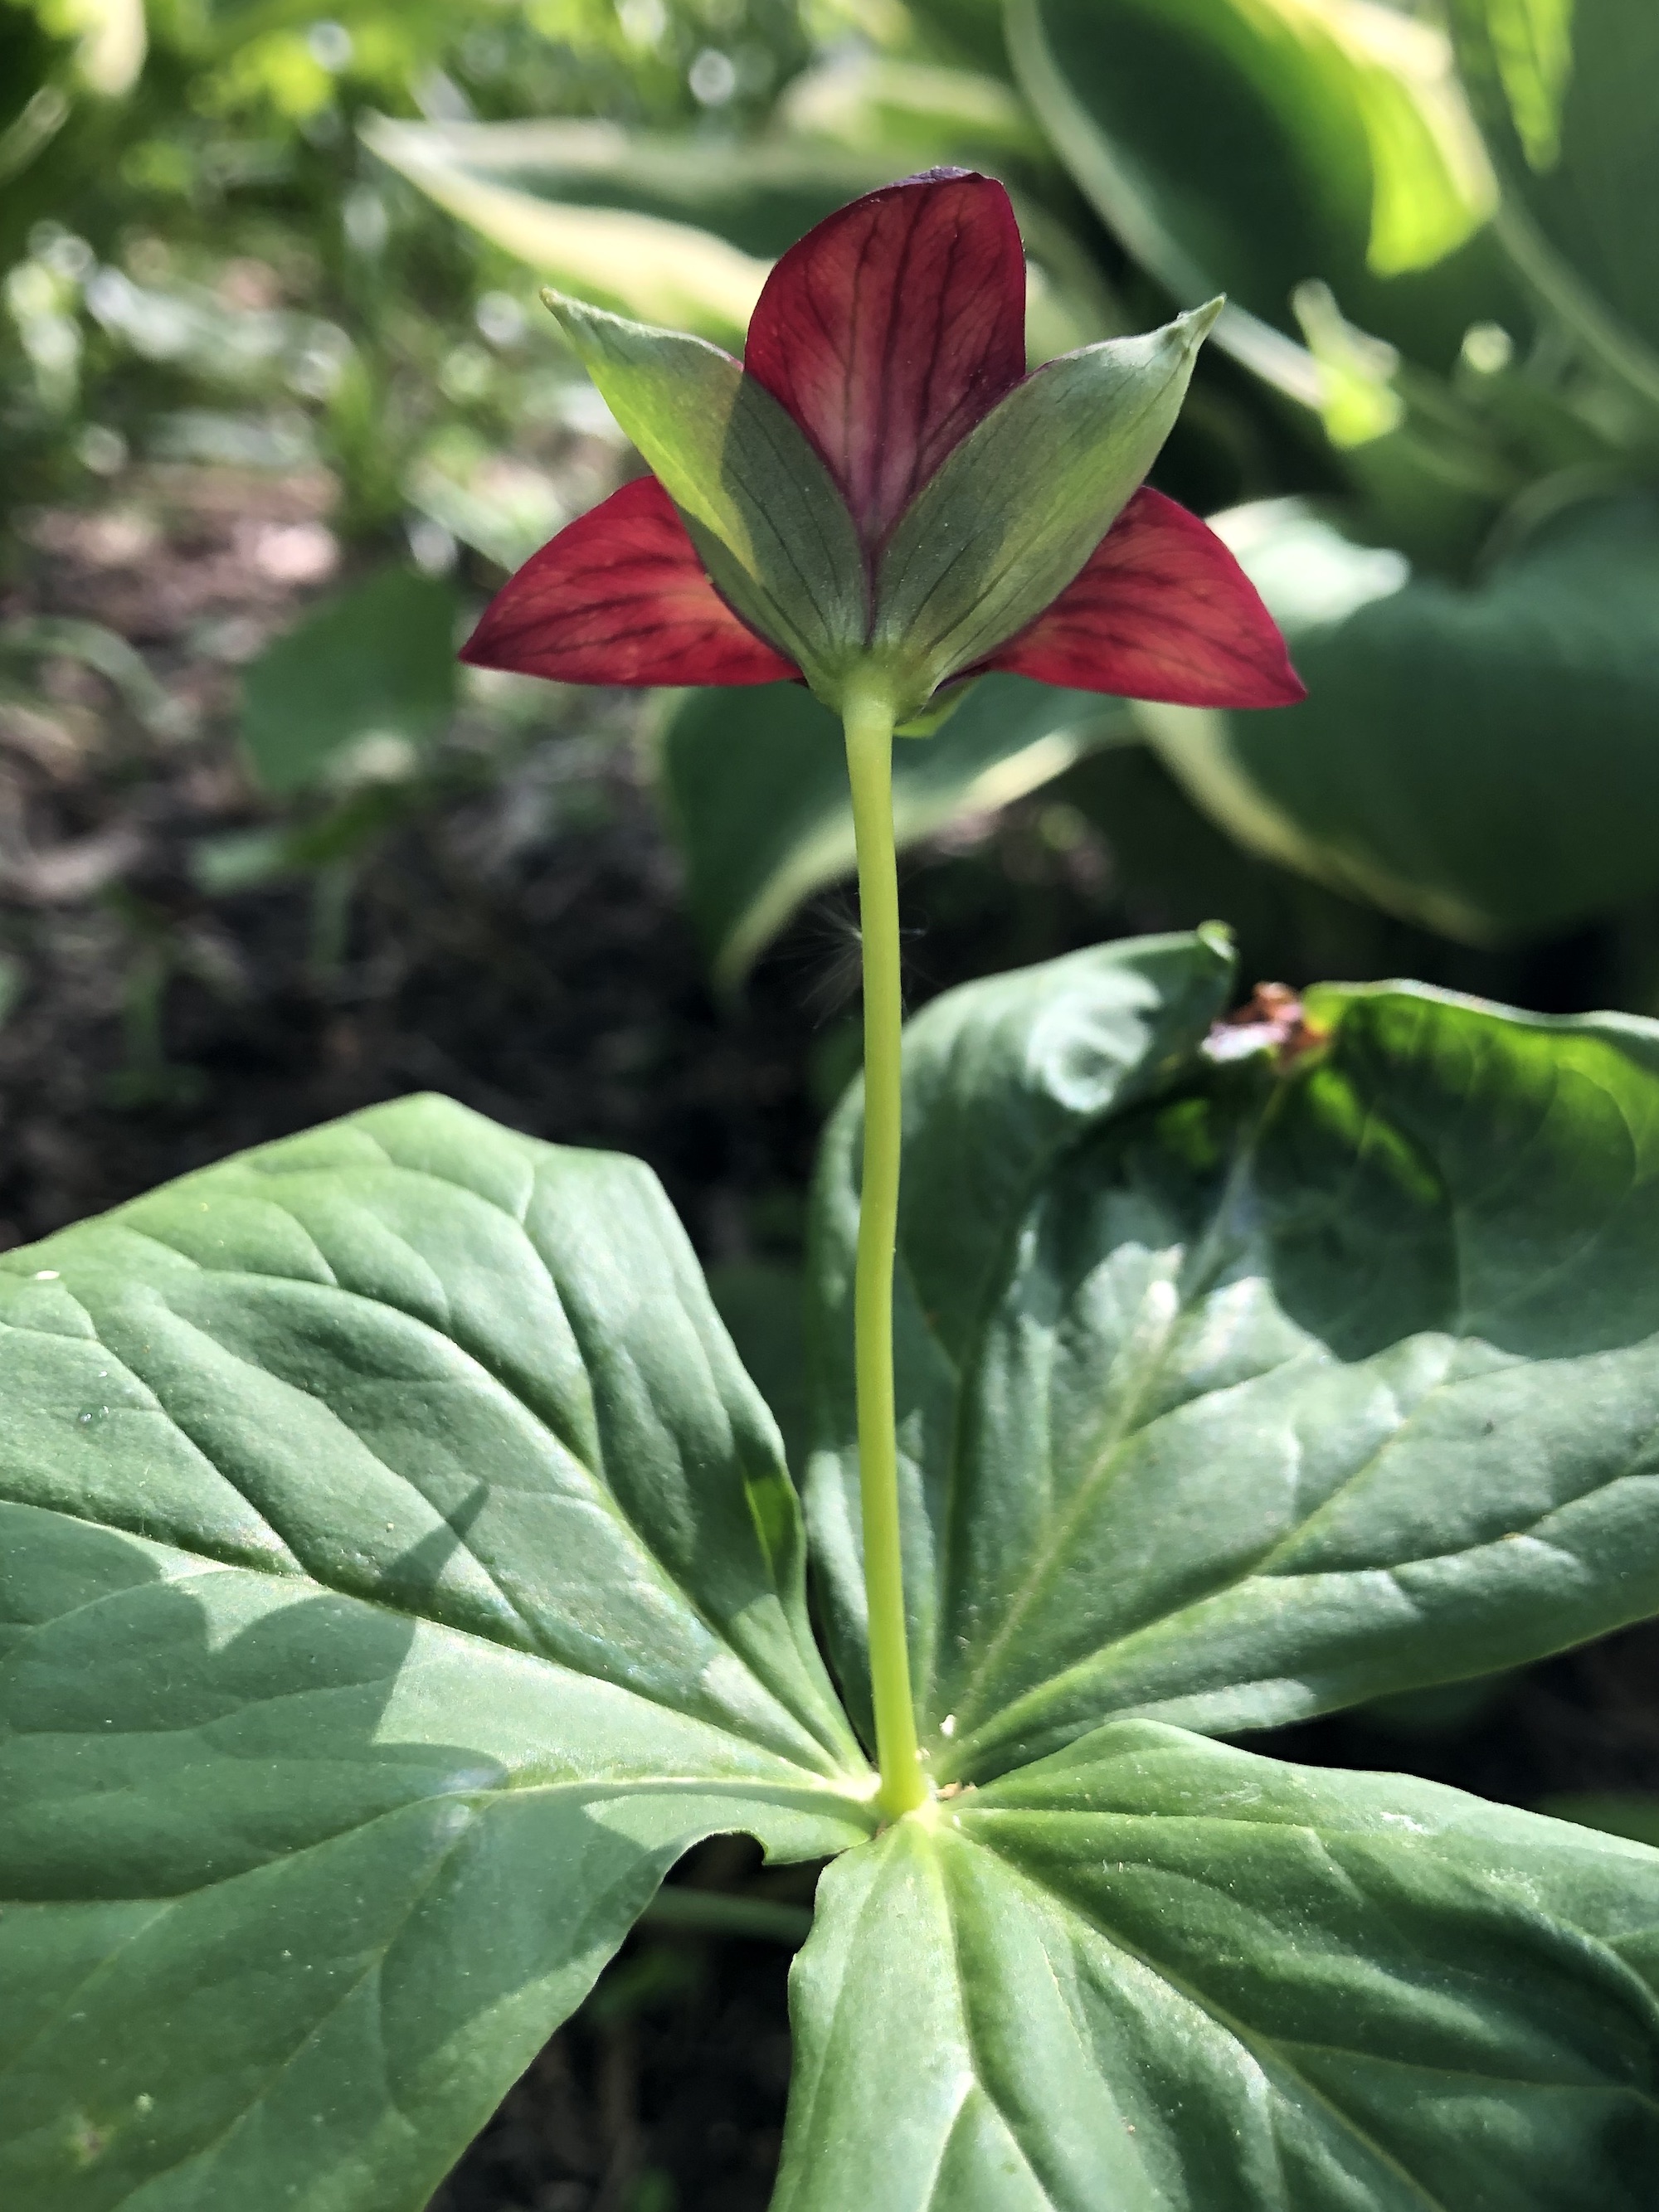 Red Trillium in Nakoma garden in Madison, Wisconsin on May 17, 2022.